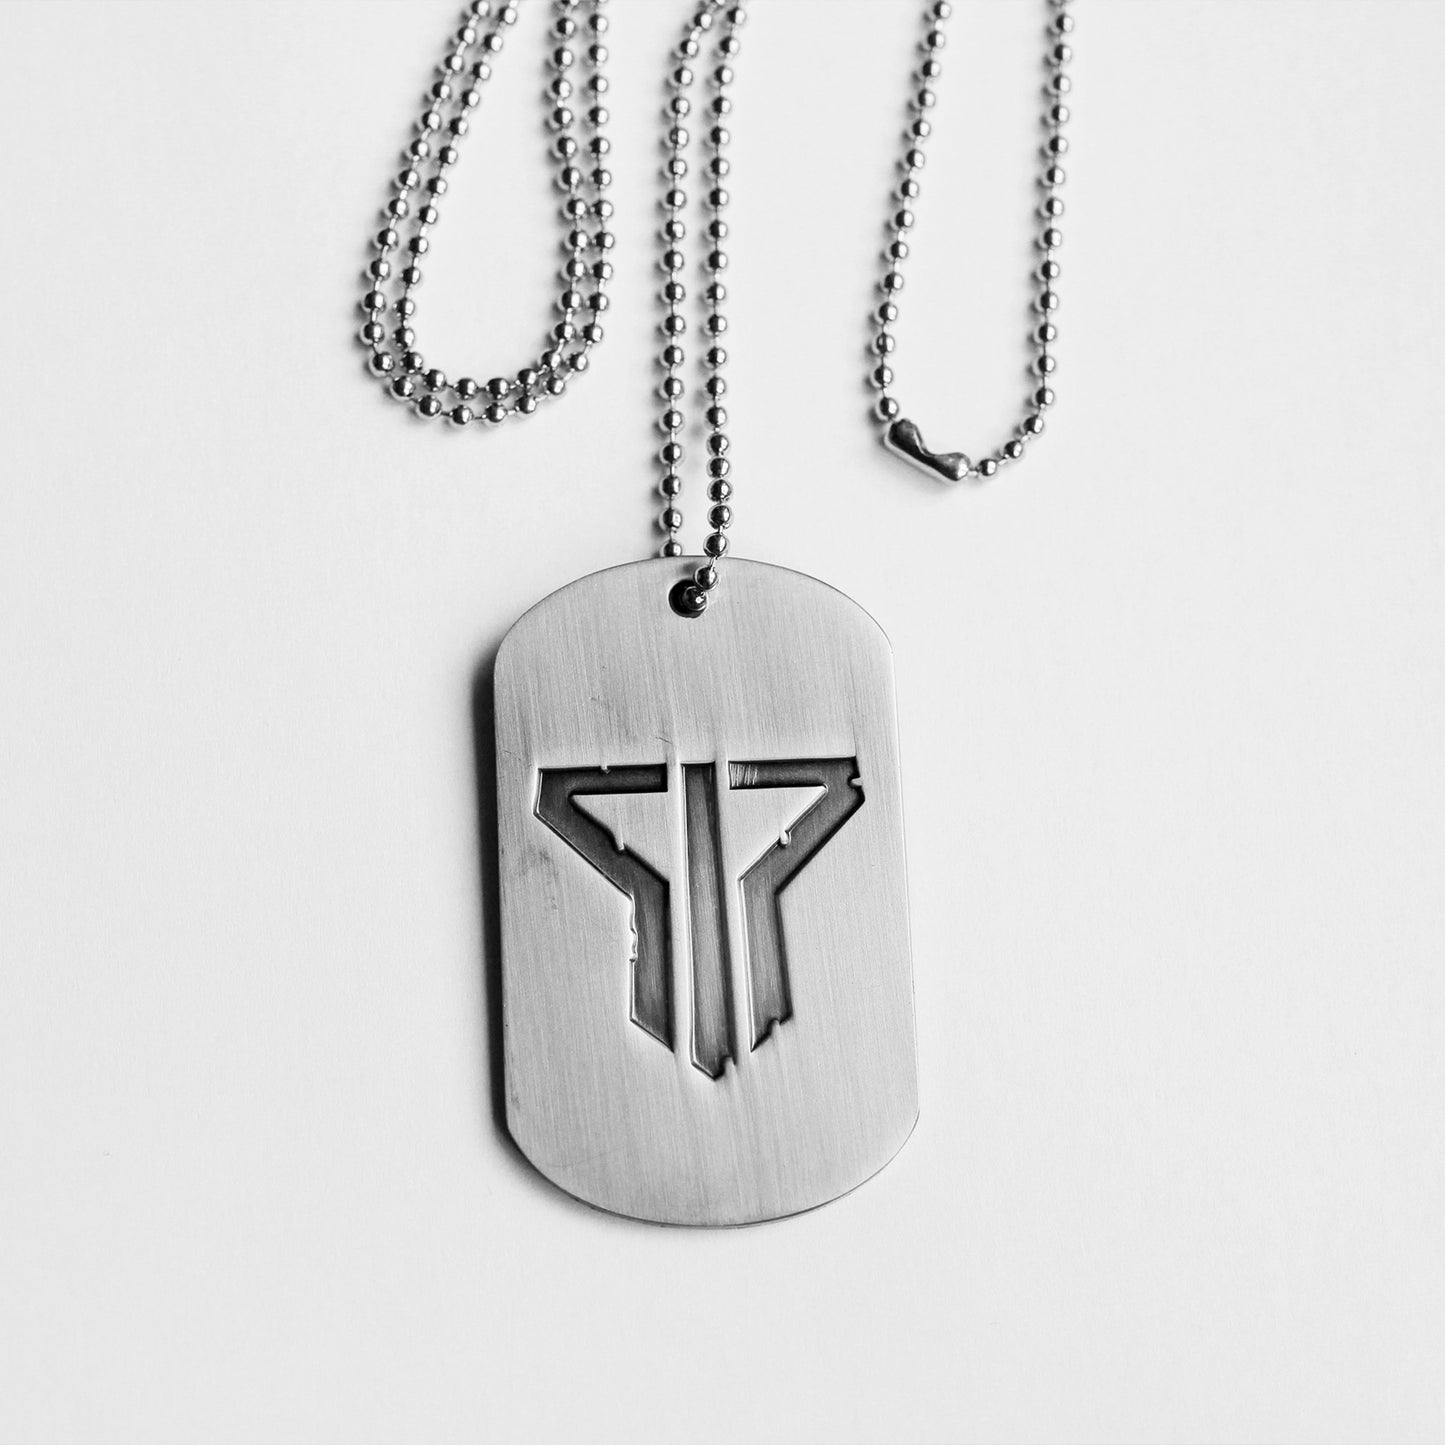 Deluxe Dogtag